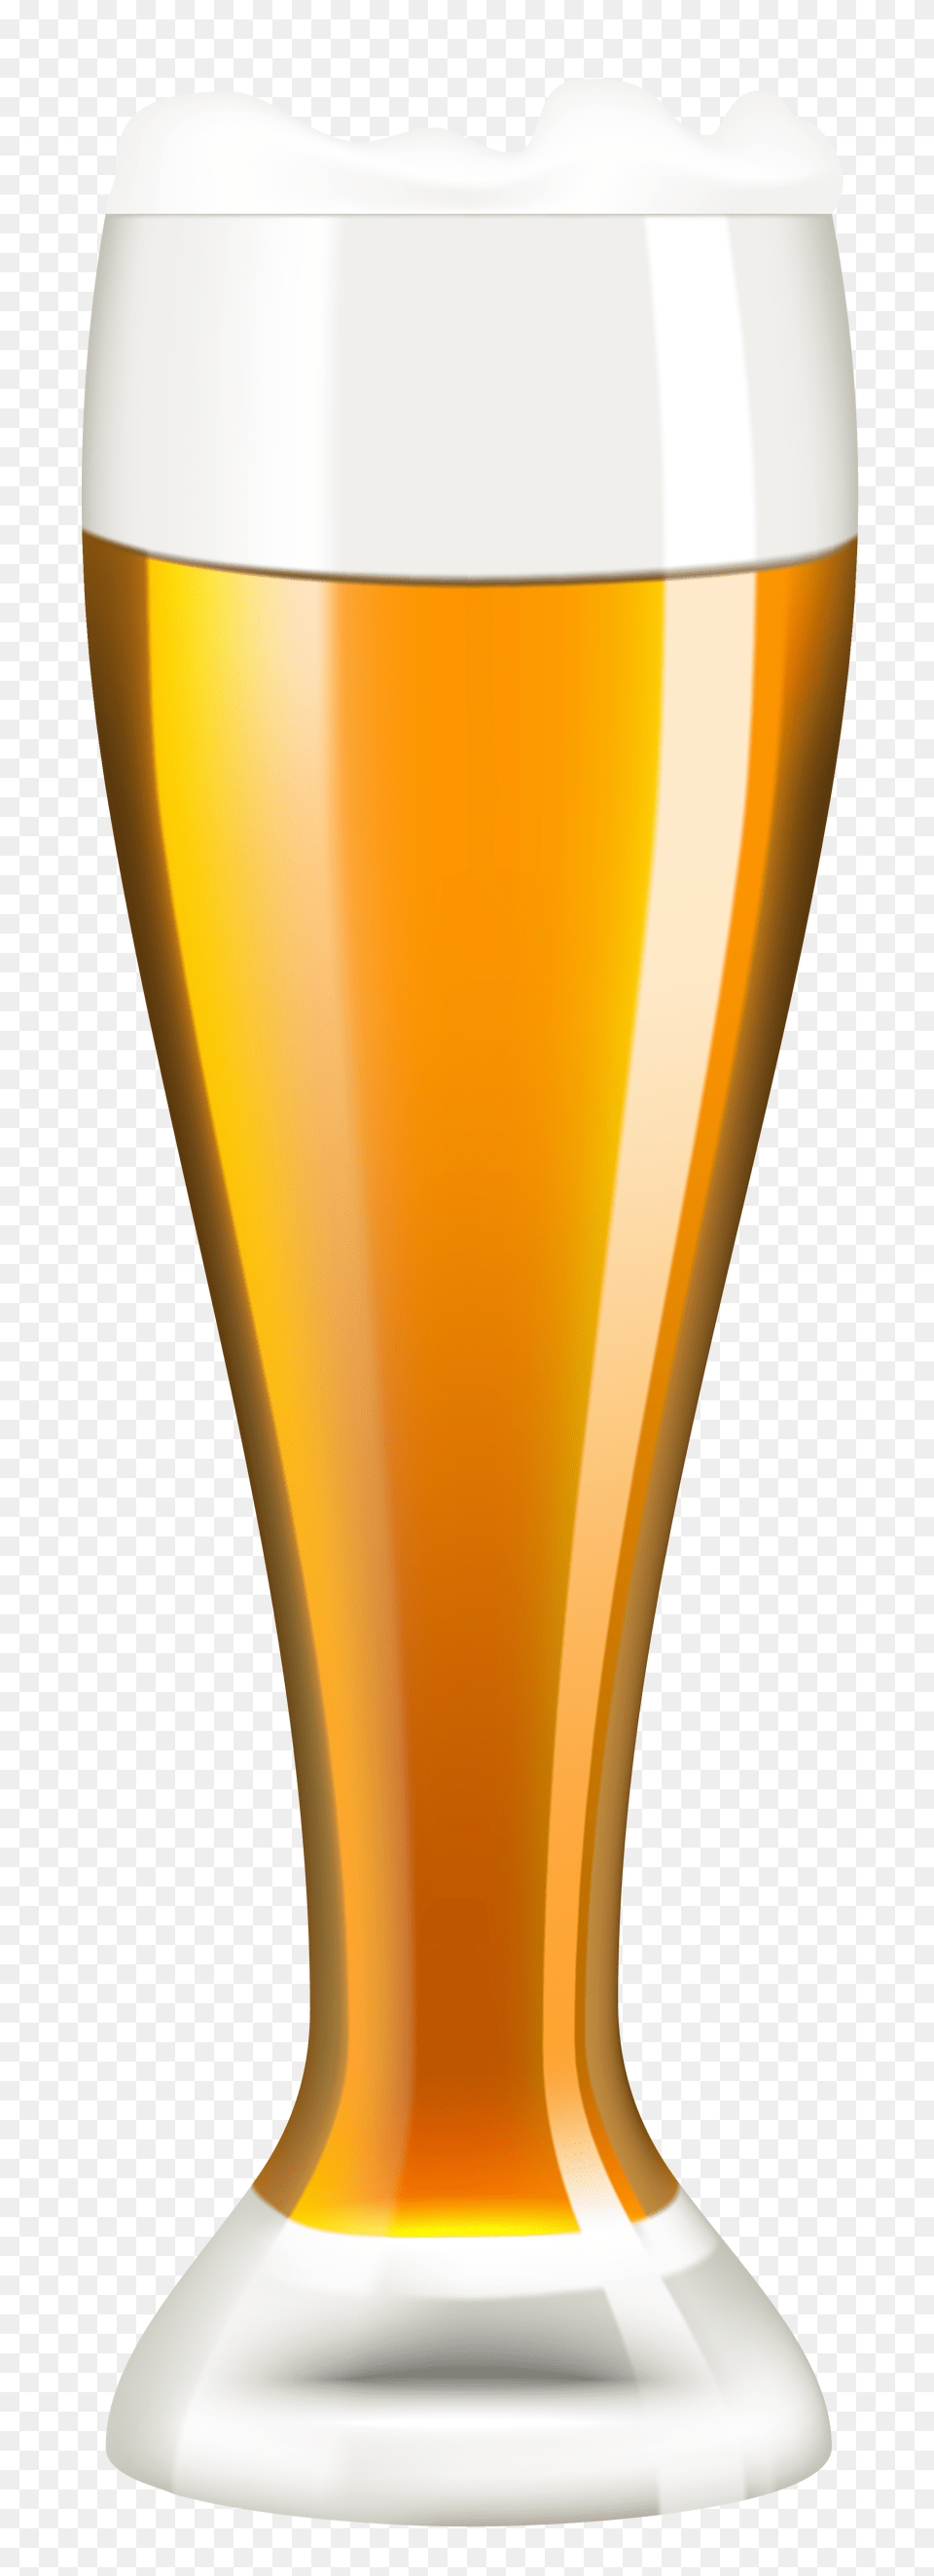 Beer Vector Clipart, Alcohol, Beer Glass, Beverage, Glass Png Image